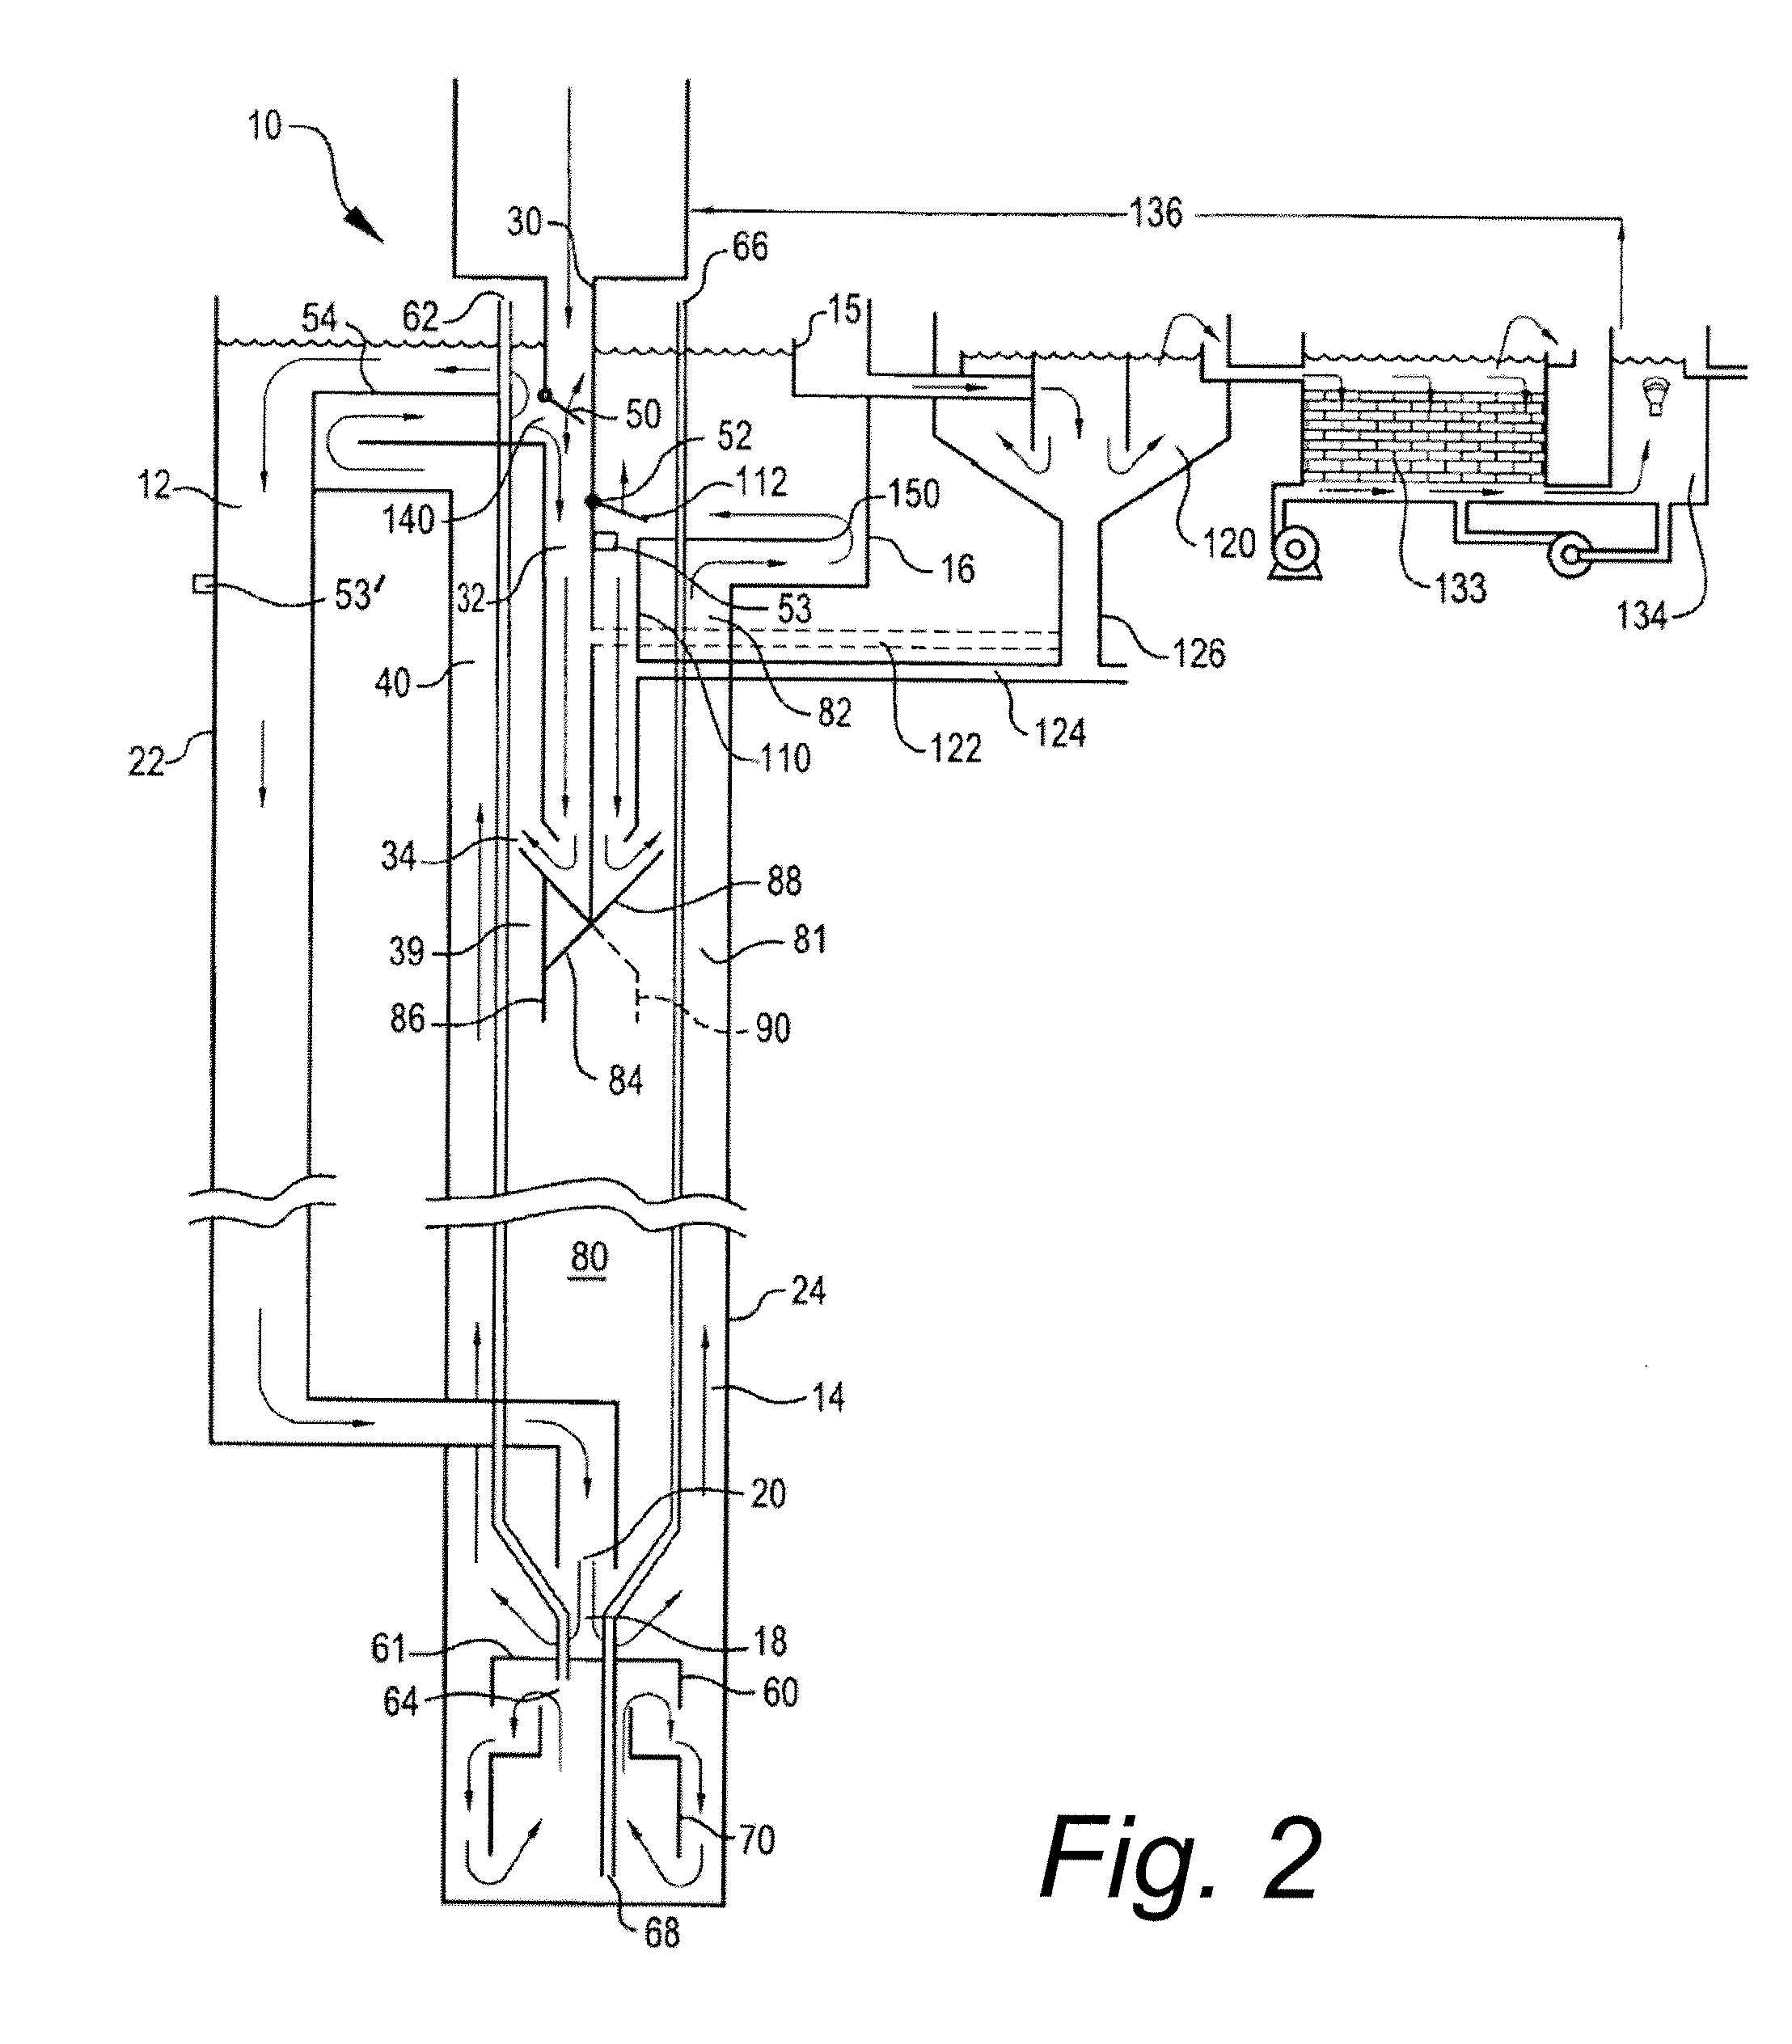 Methods and Devices for Improved Aeration From Vertically-Orientated Submerged Membranes